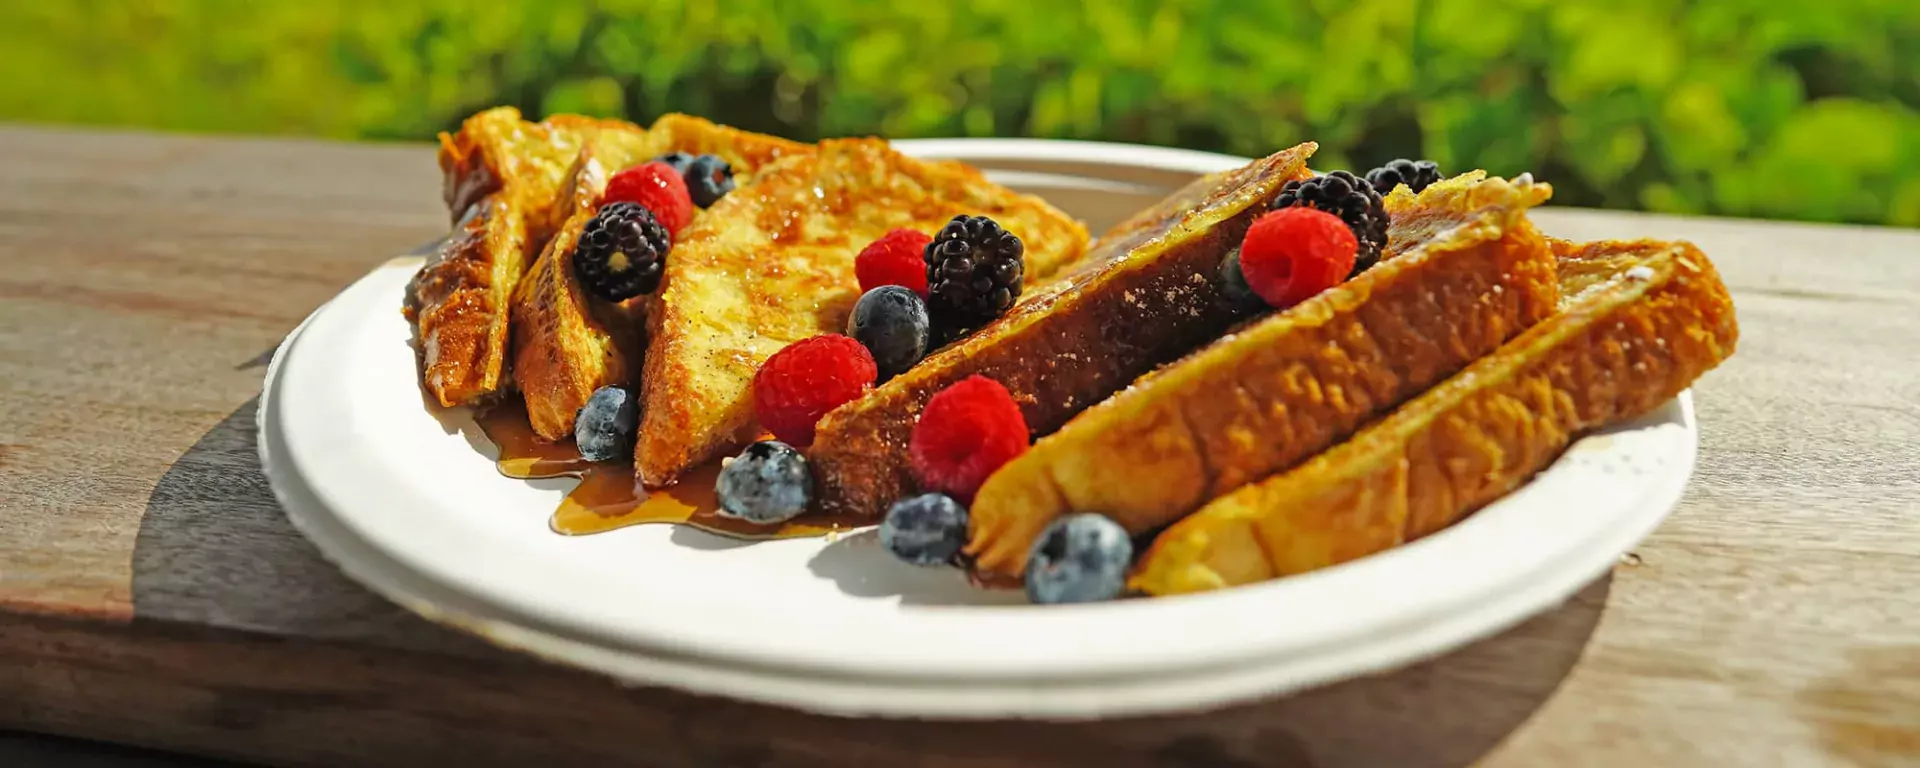 French Toast topped with syrup, raspberries, blueberries, and blackberries.